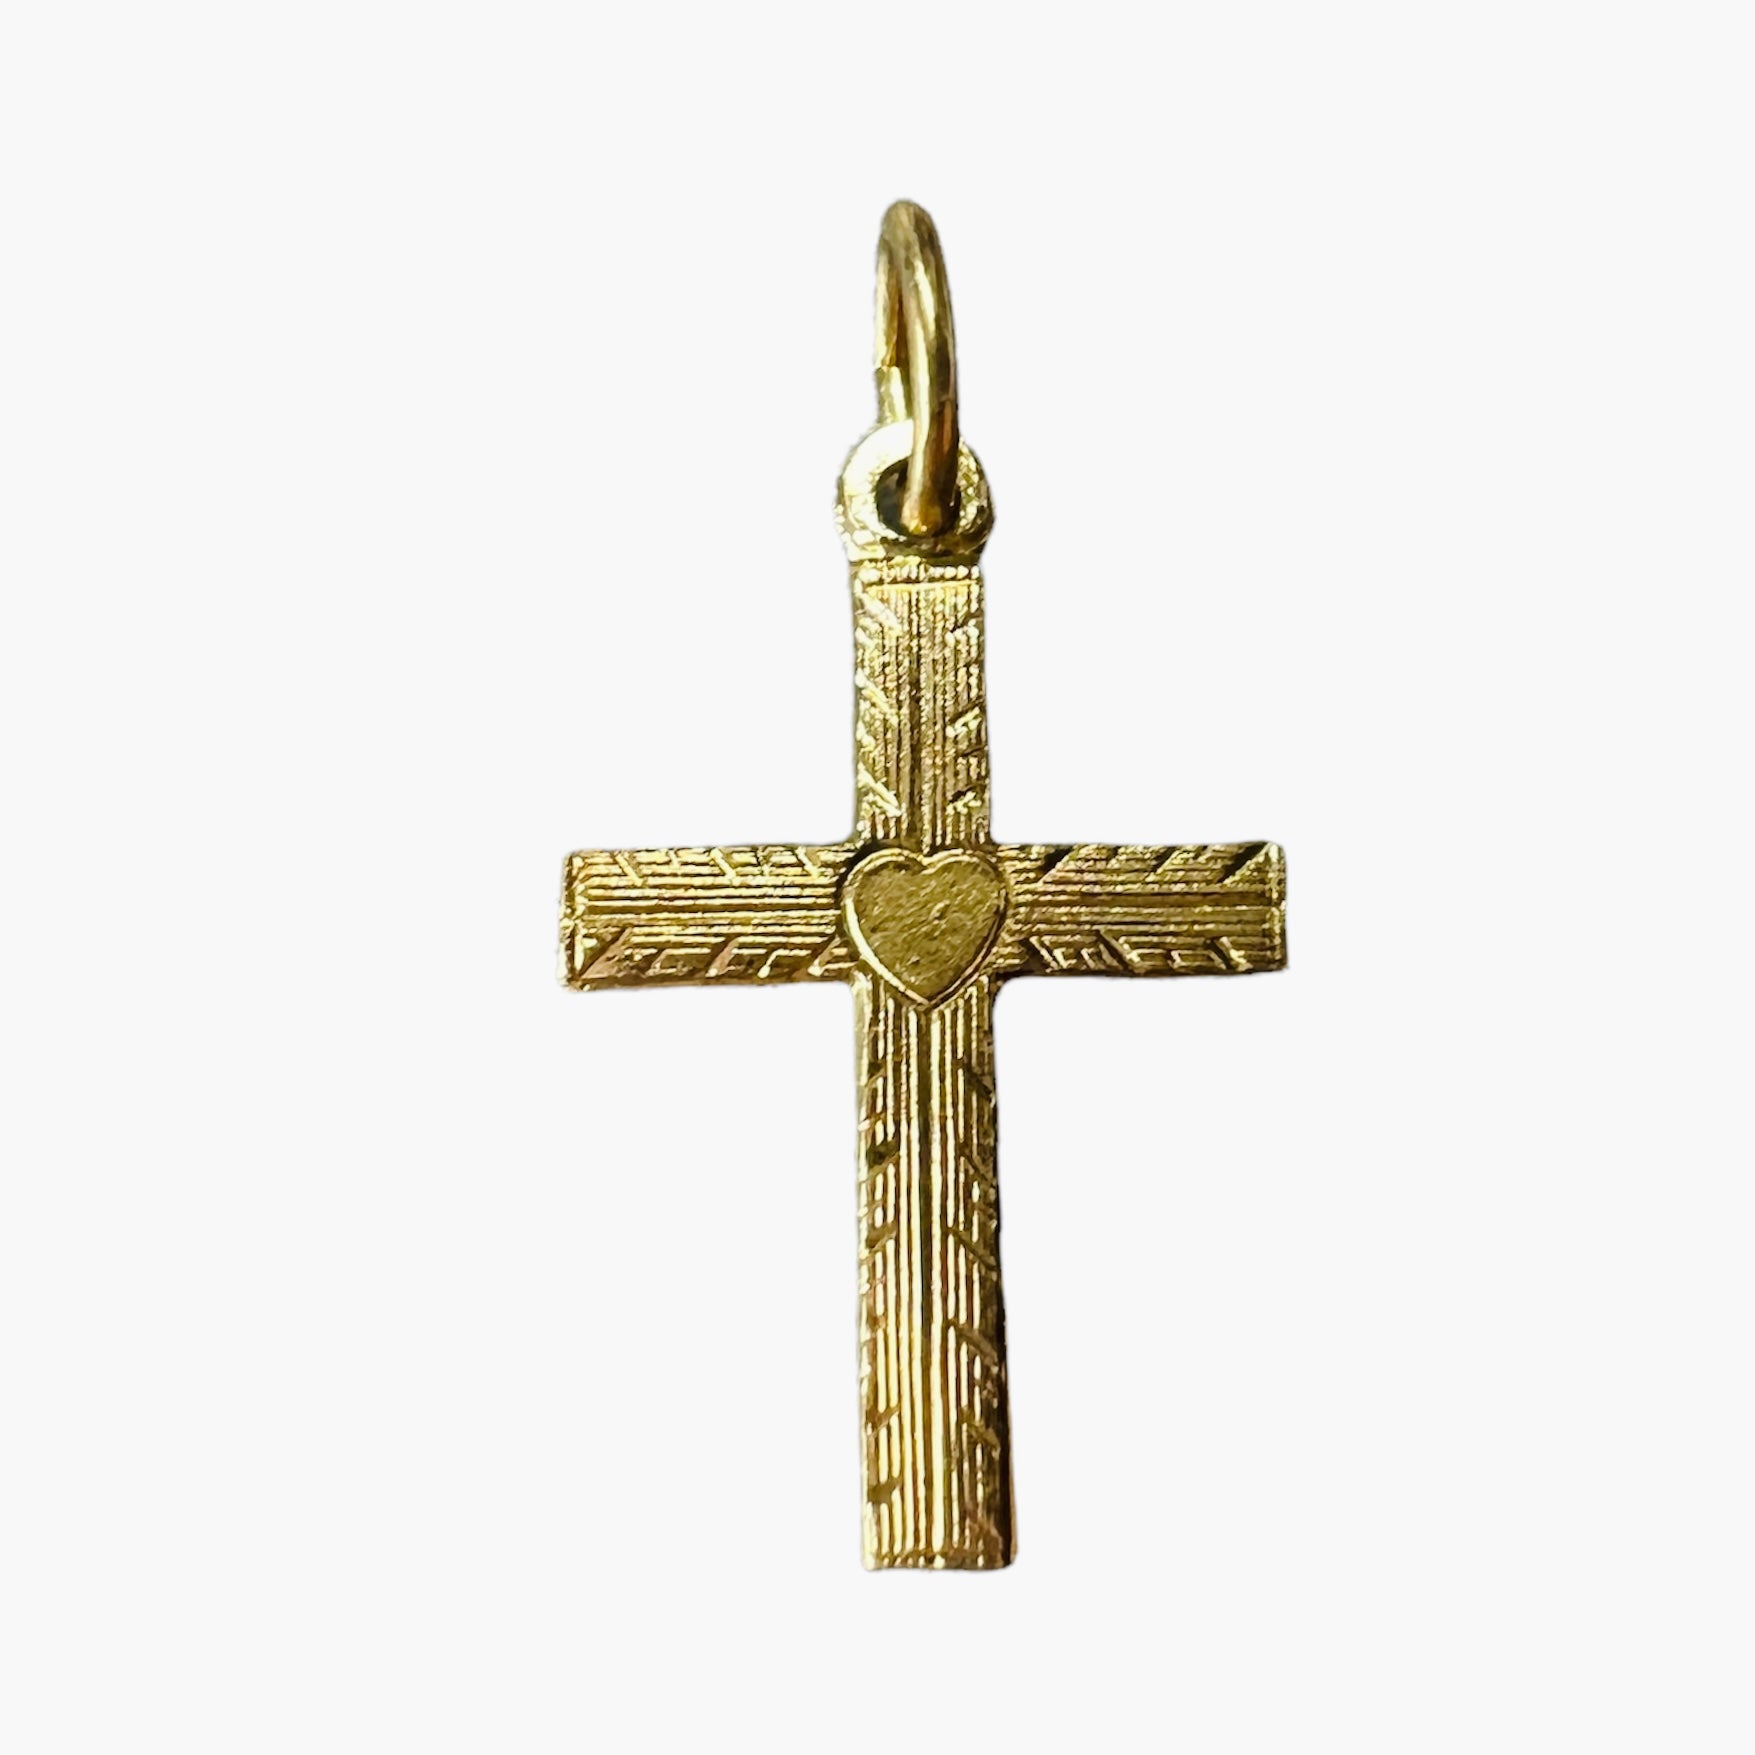 Solid 14K Yellow Gold Textured Shinny Heart Engraved Cross Pendant 17x9mm